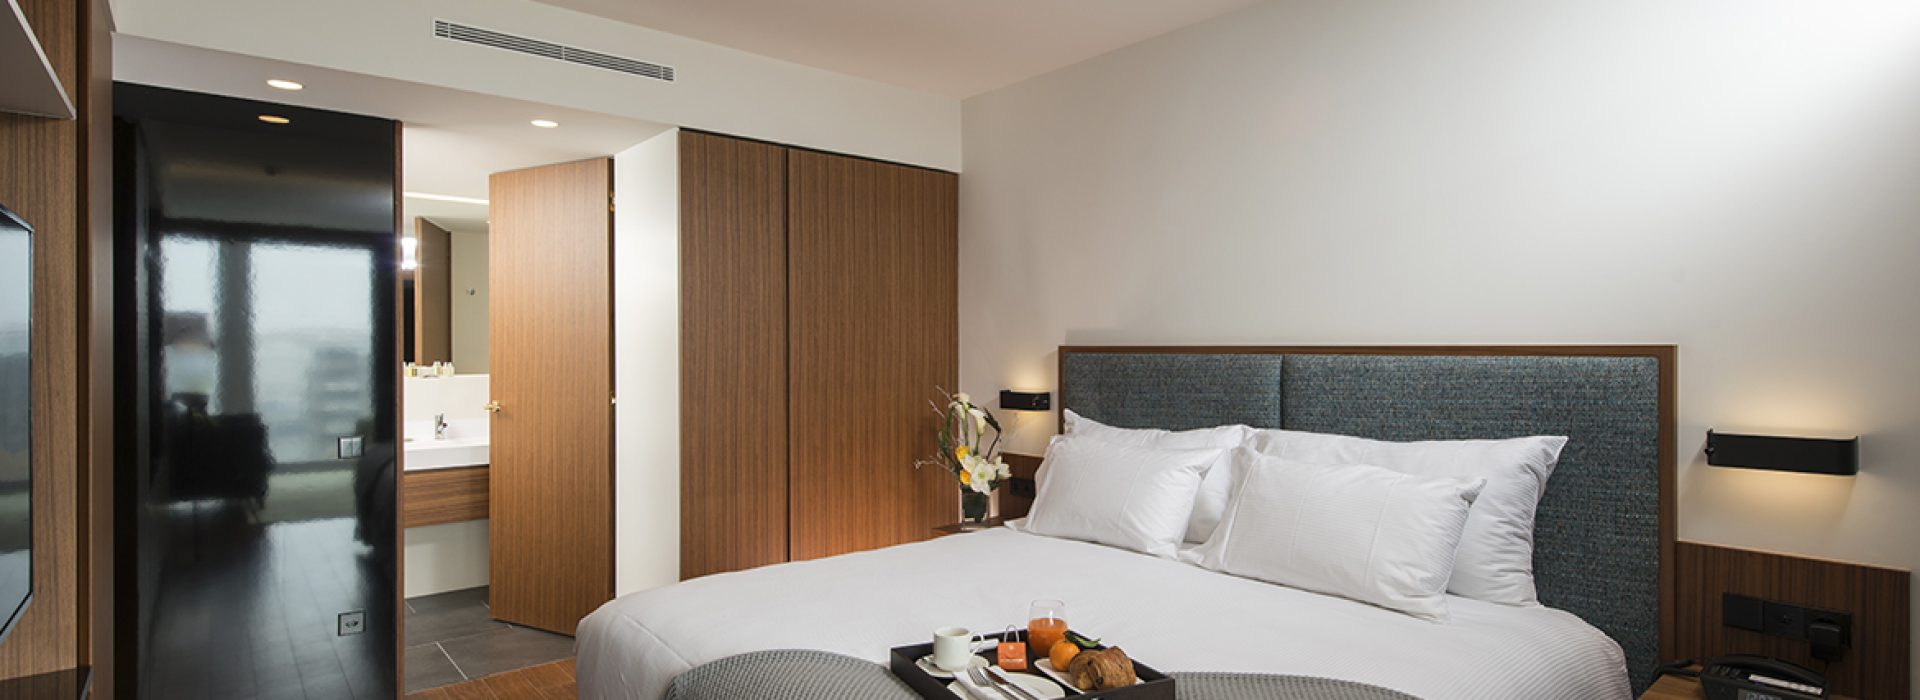 wall design lamp made in barcelona by insolit, ideal for hotel lighting design